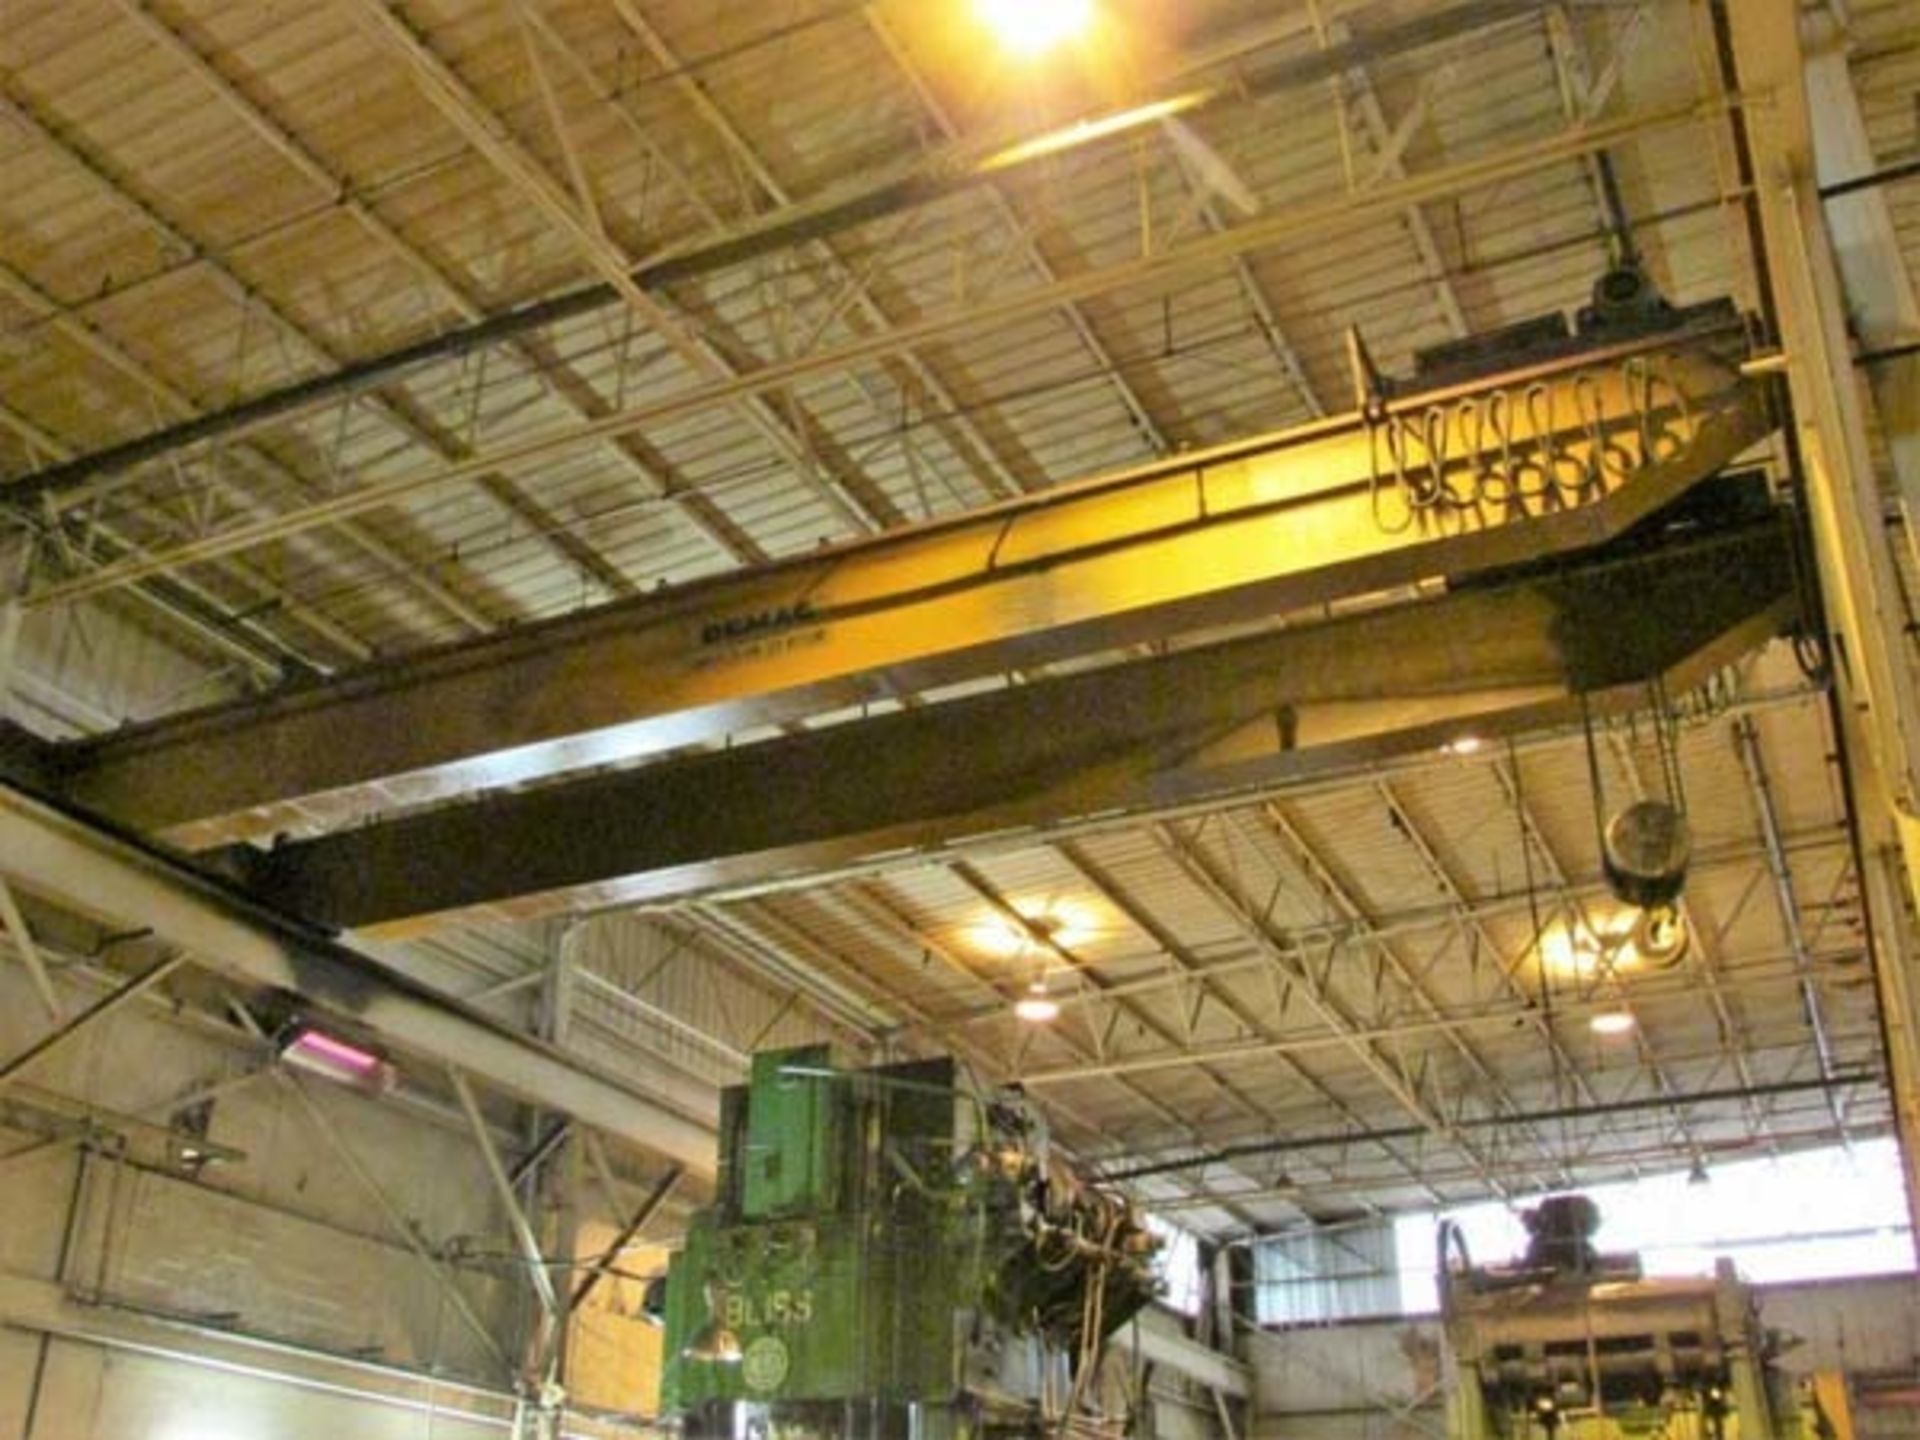 Demag Top Riding Double Girder Bridge Crane | 25 Ton x 50', Mdl: N/A, S/N: 75066, Located In: - Image 3 of 9